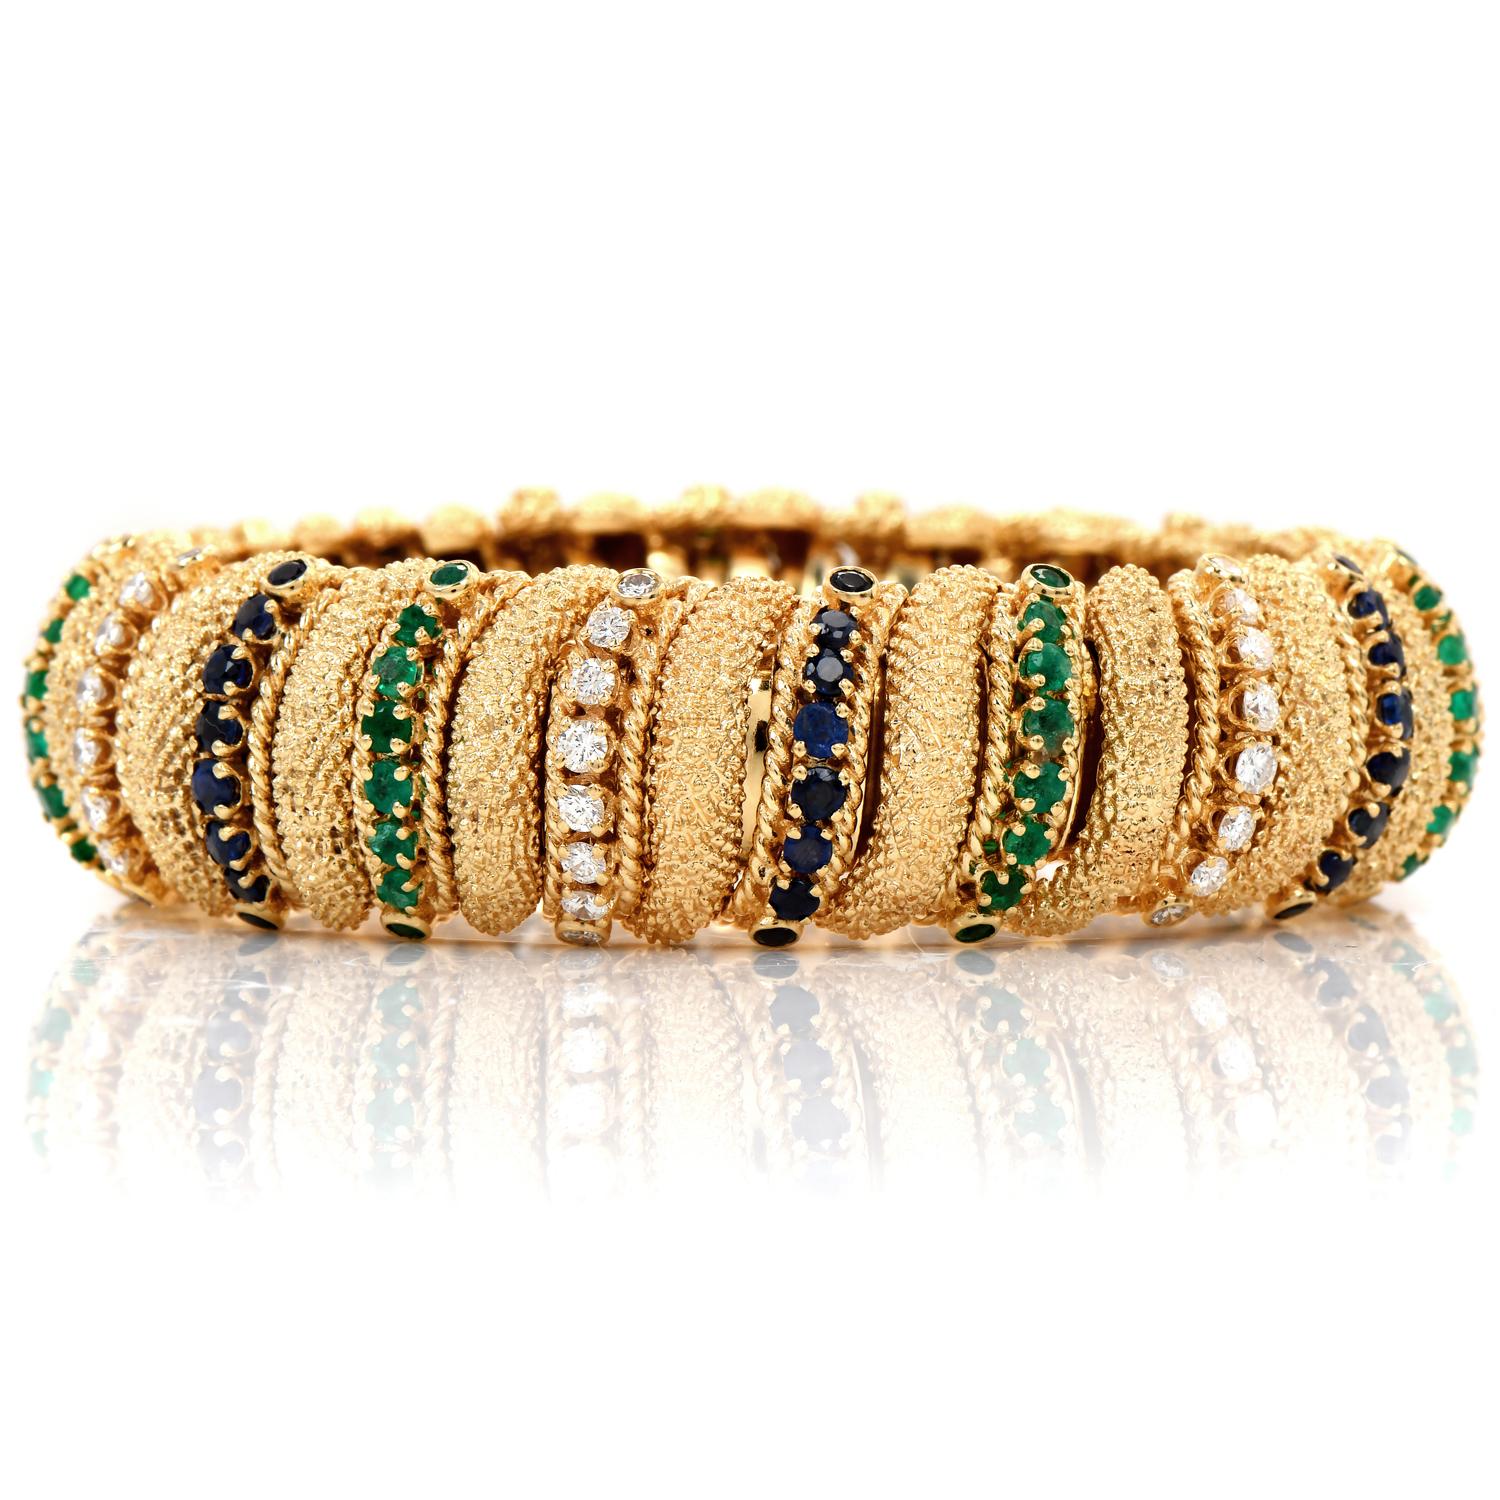 An upscale-looking Shrimp bracelet with optimum craftsmanship and detailing. 

This lovely classic estate Bangle bracelet is crafted in solid 18K yellow gold, with a beaded texture.

This bracelet is accented in several links with genuine round cut